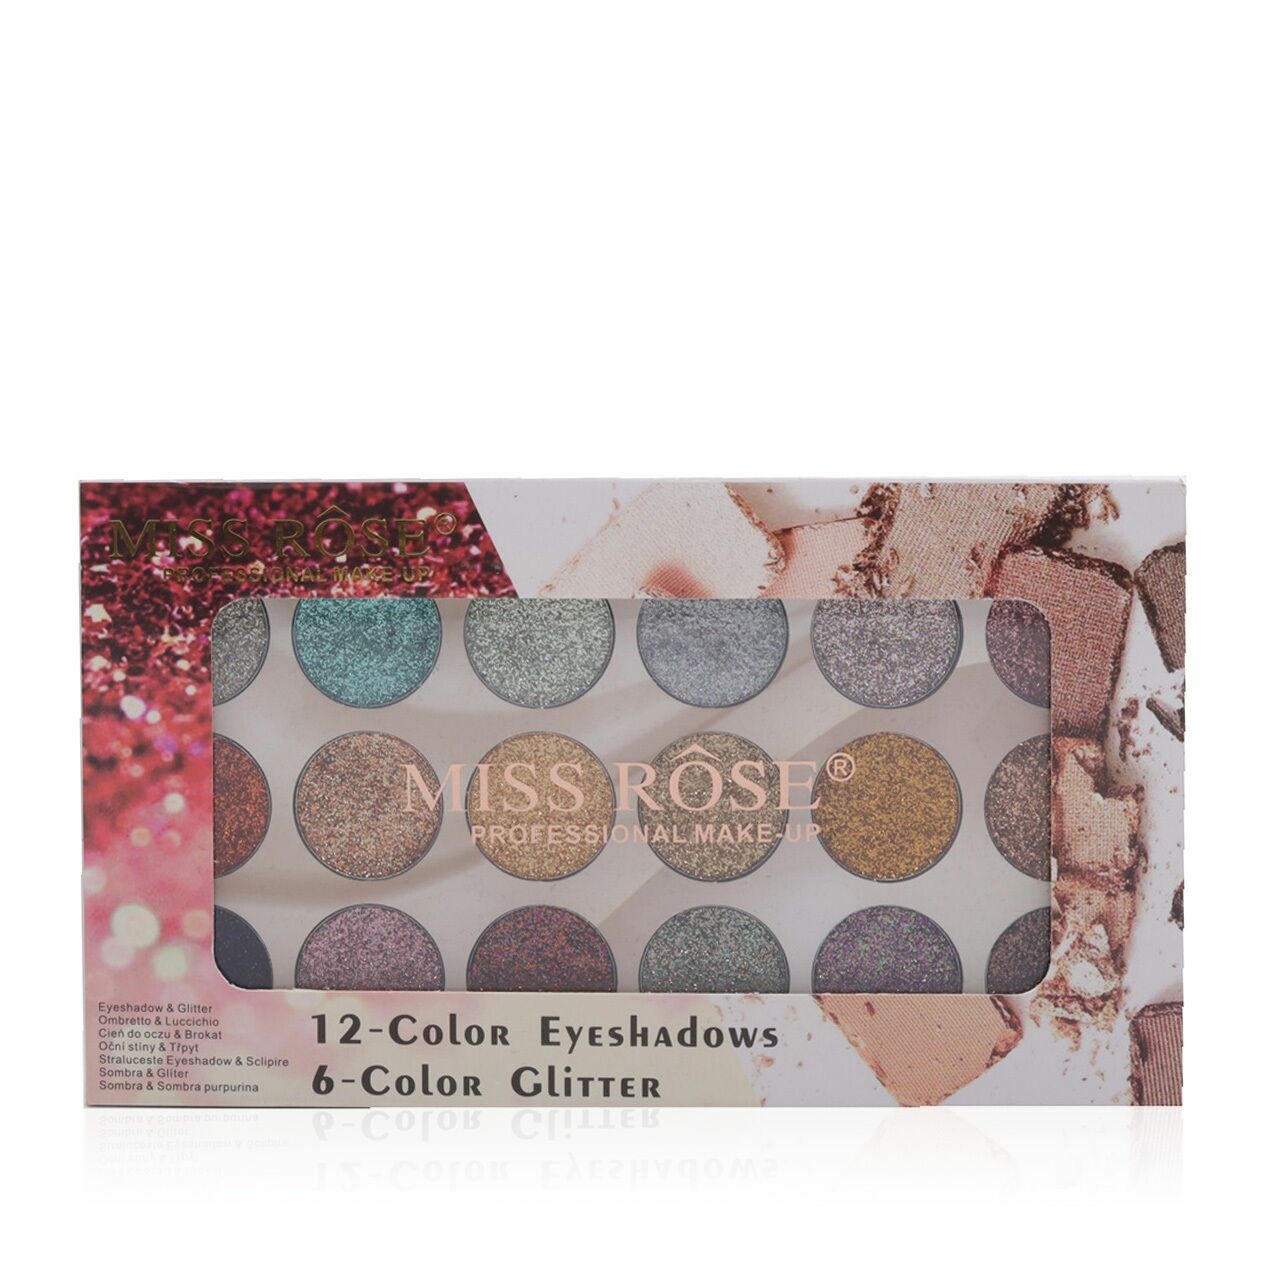 Private Collection Miss Rose 12-Color Eyeshadows 6-Color Glitter Sets and Palette